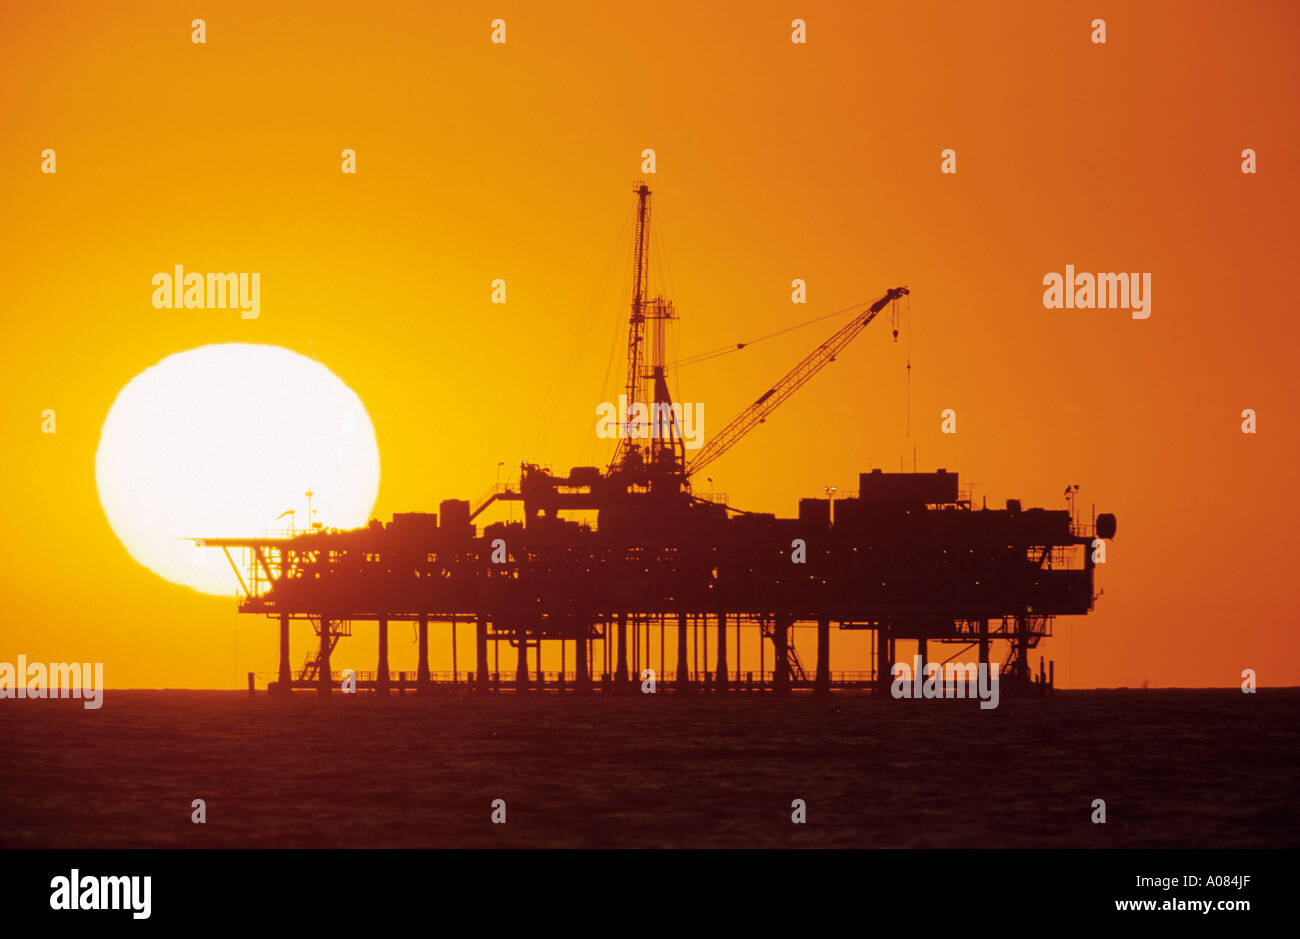 oil drill rig on ocean Stock Photo